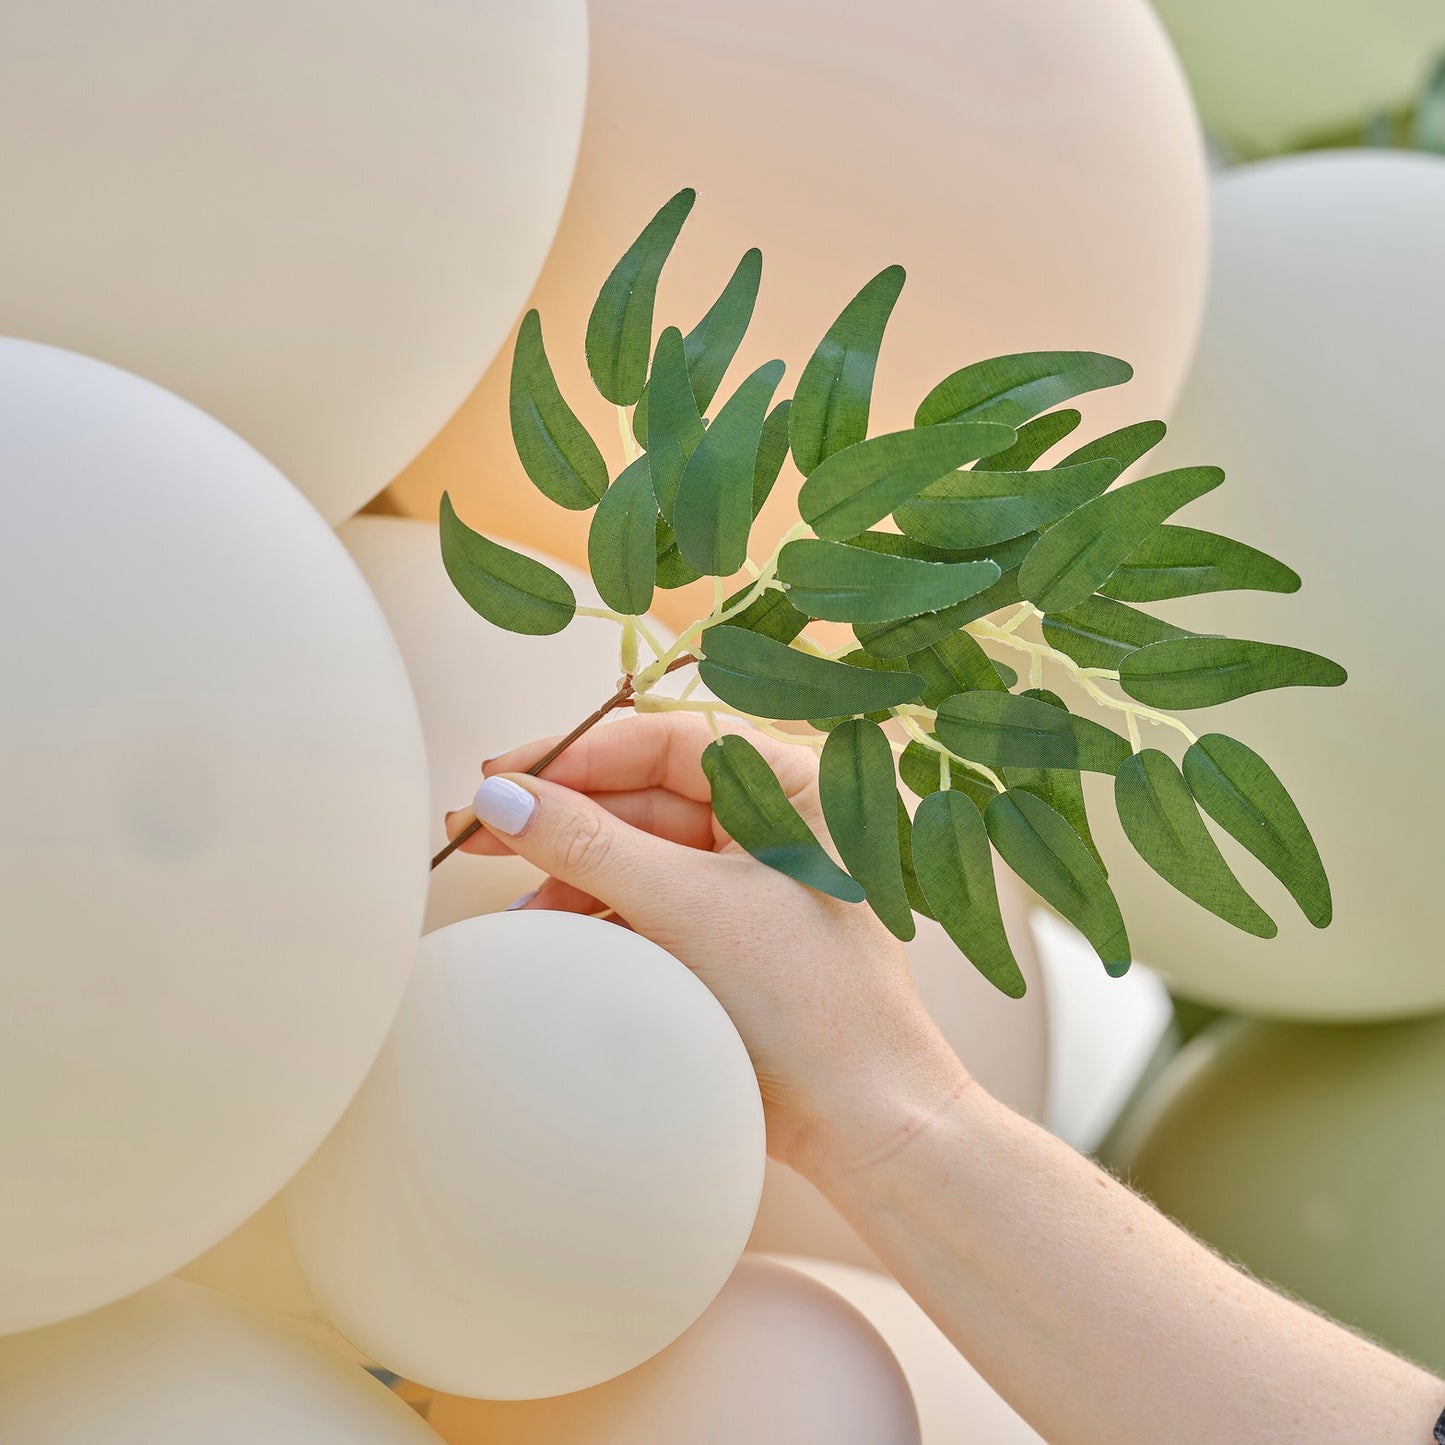 Taupe, Peach & Sage Balloon Arch with Eucalyptus, Sage Foliage and Streamers